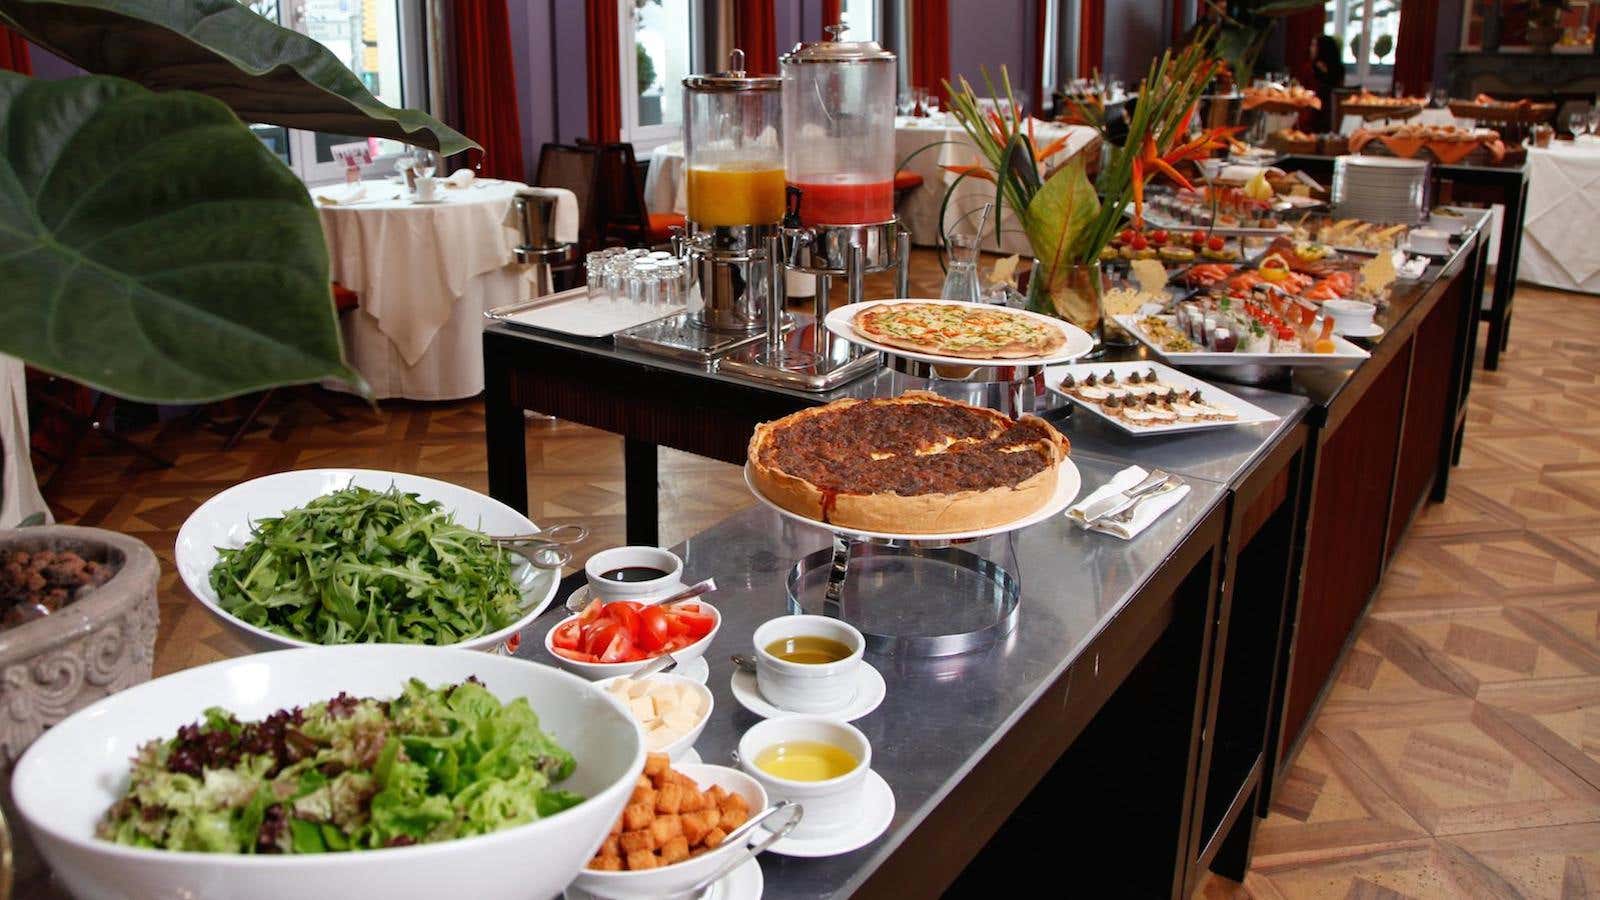 A buffet doesn’t have to be bad news for your diet.